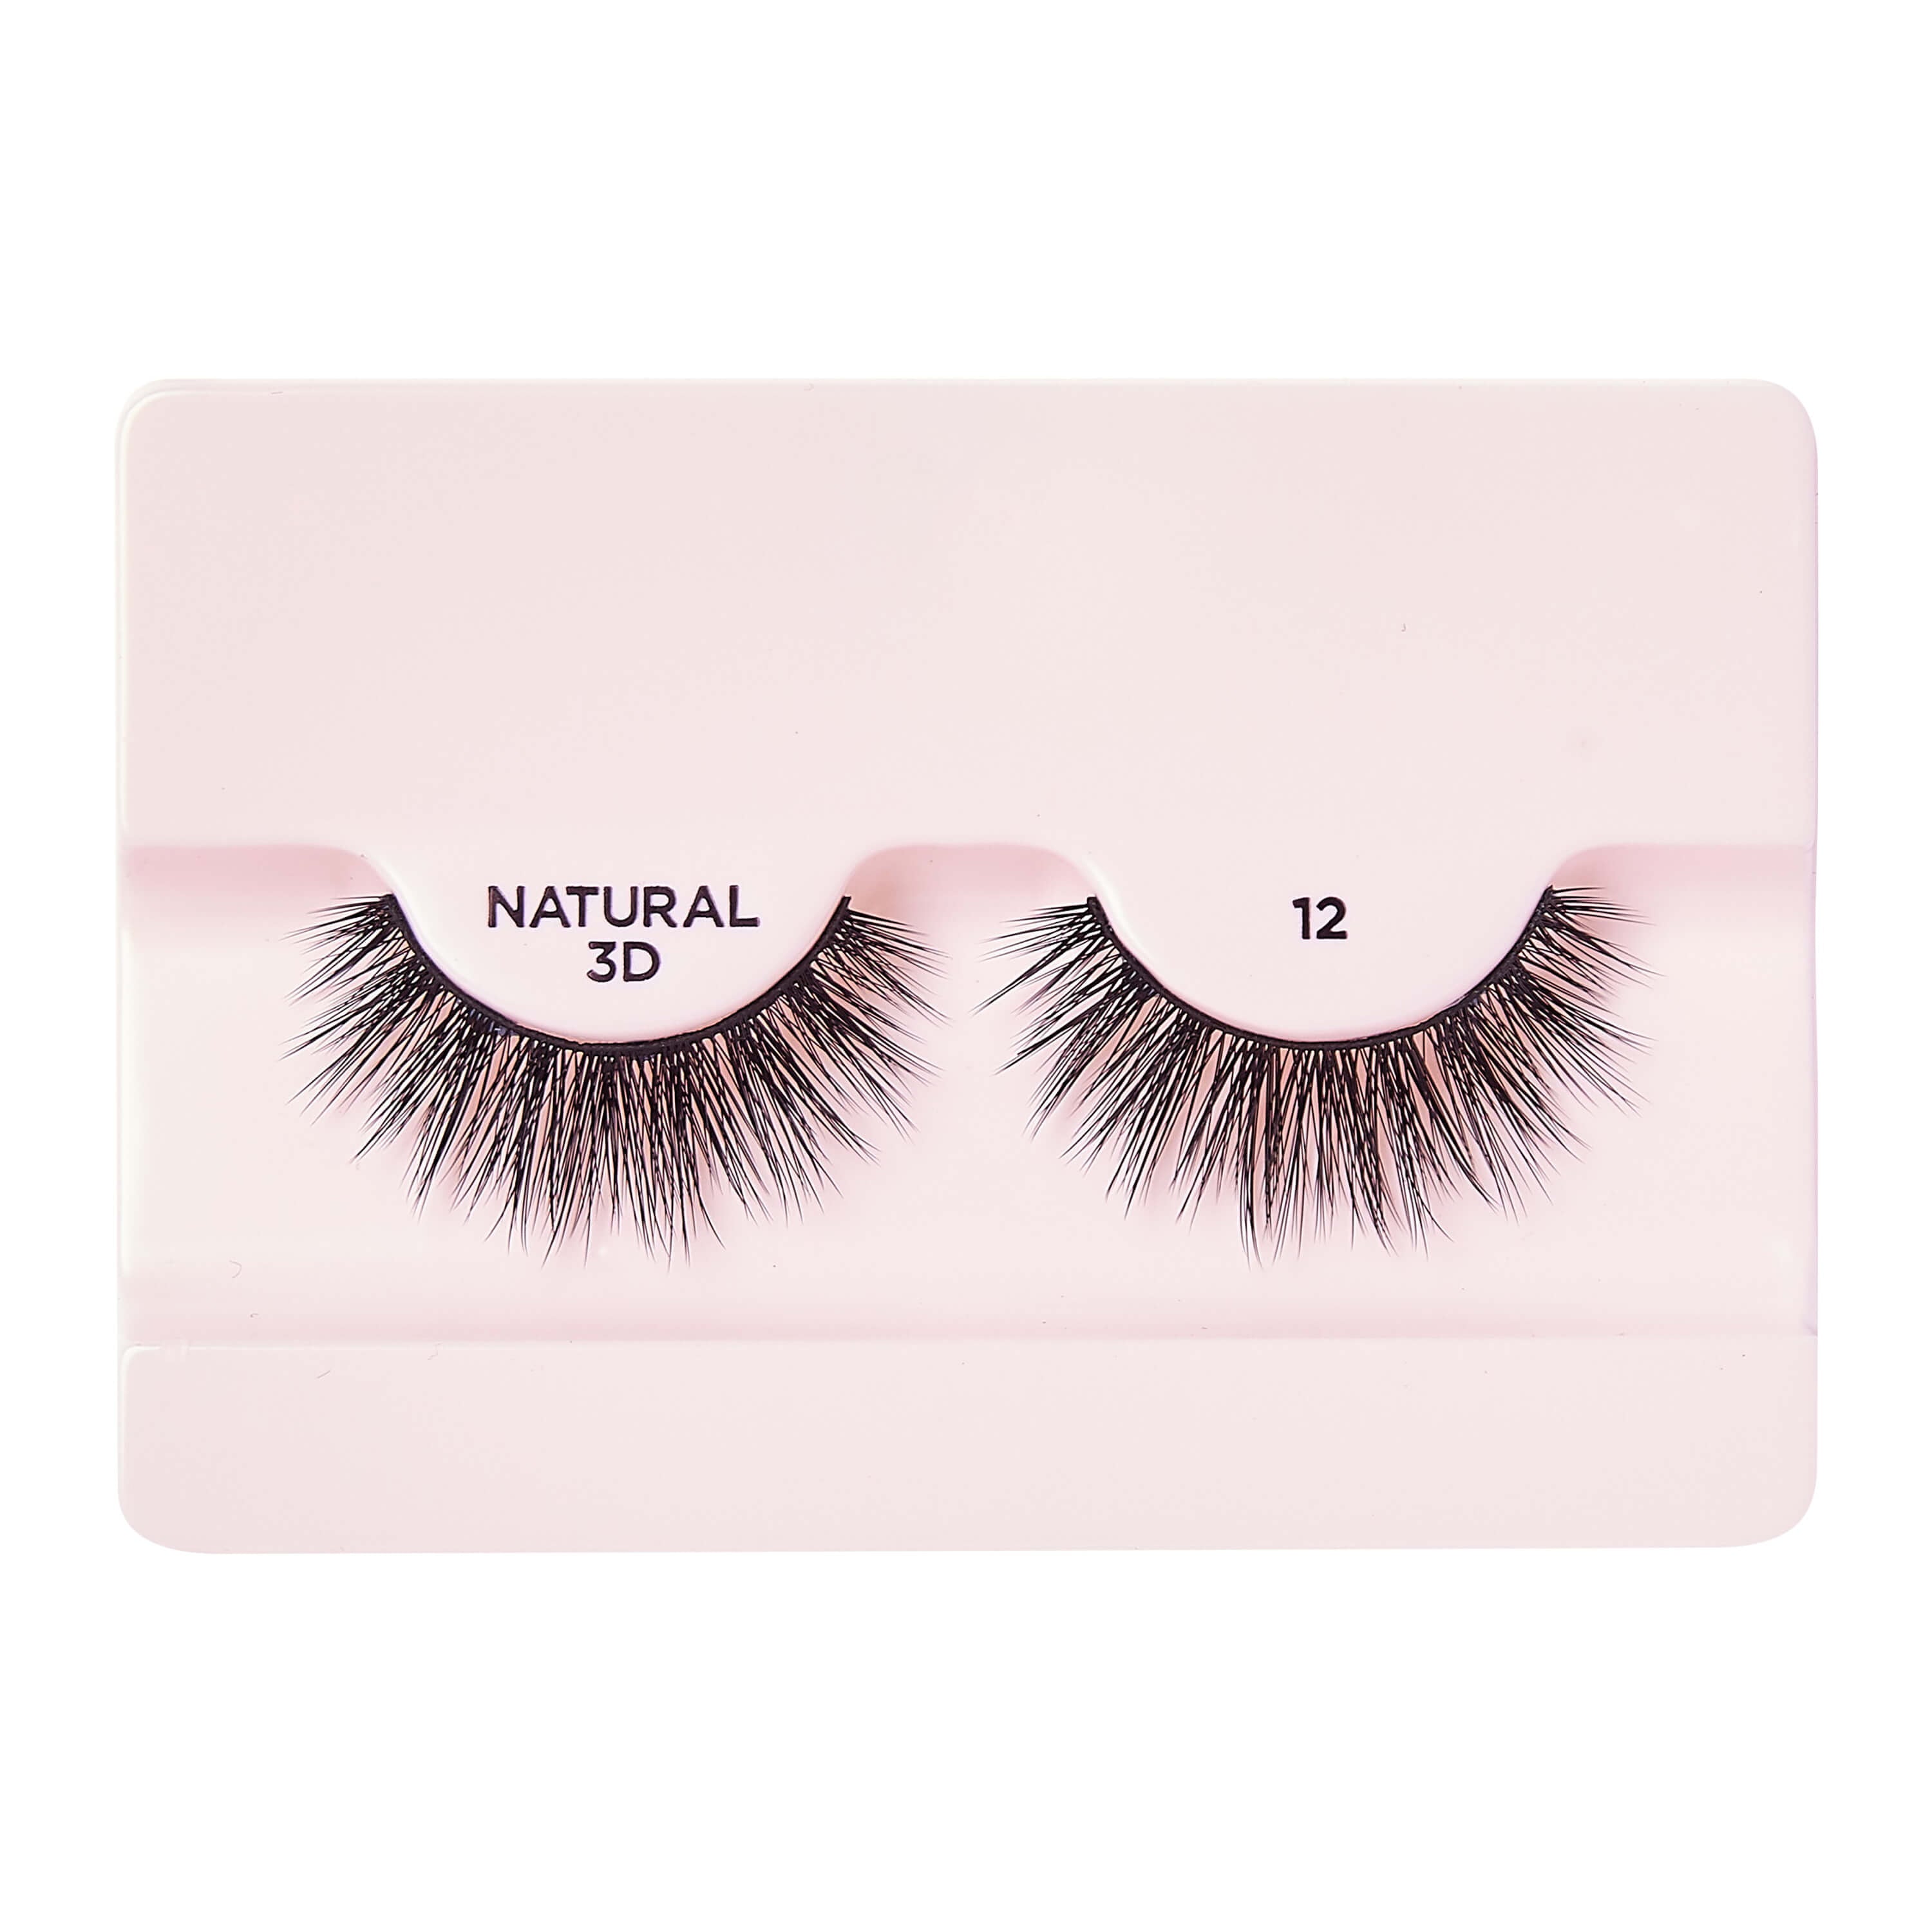 I.Envy By Kiss 3D Natural Lashes Collection - 12 (KPEI12)